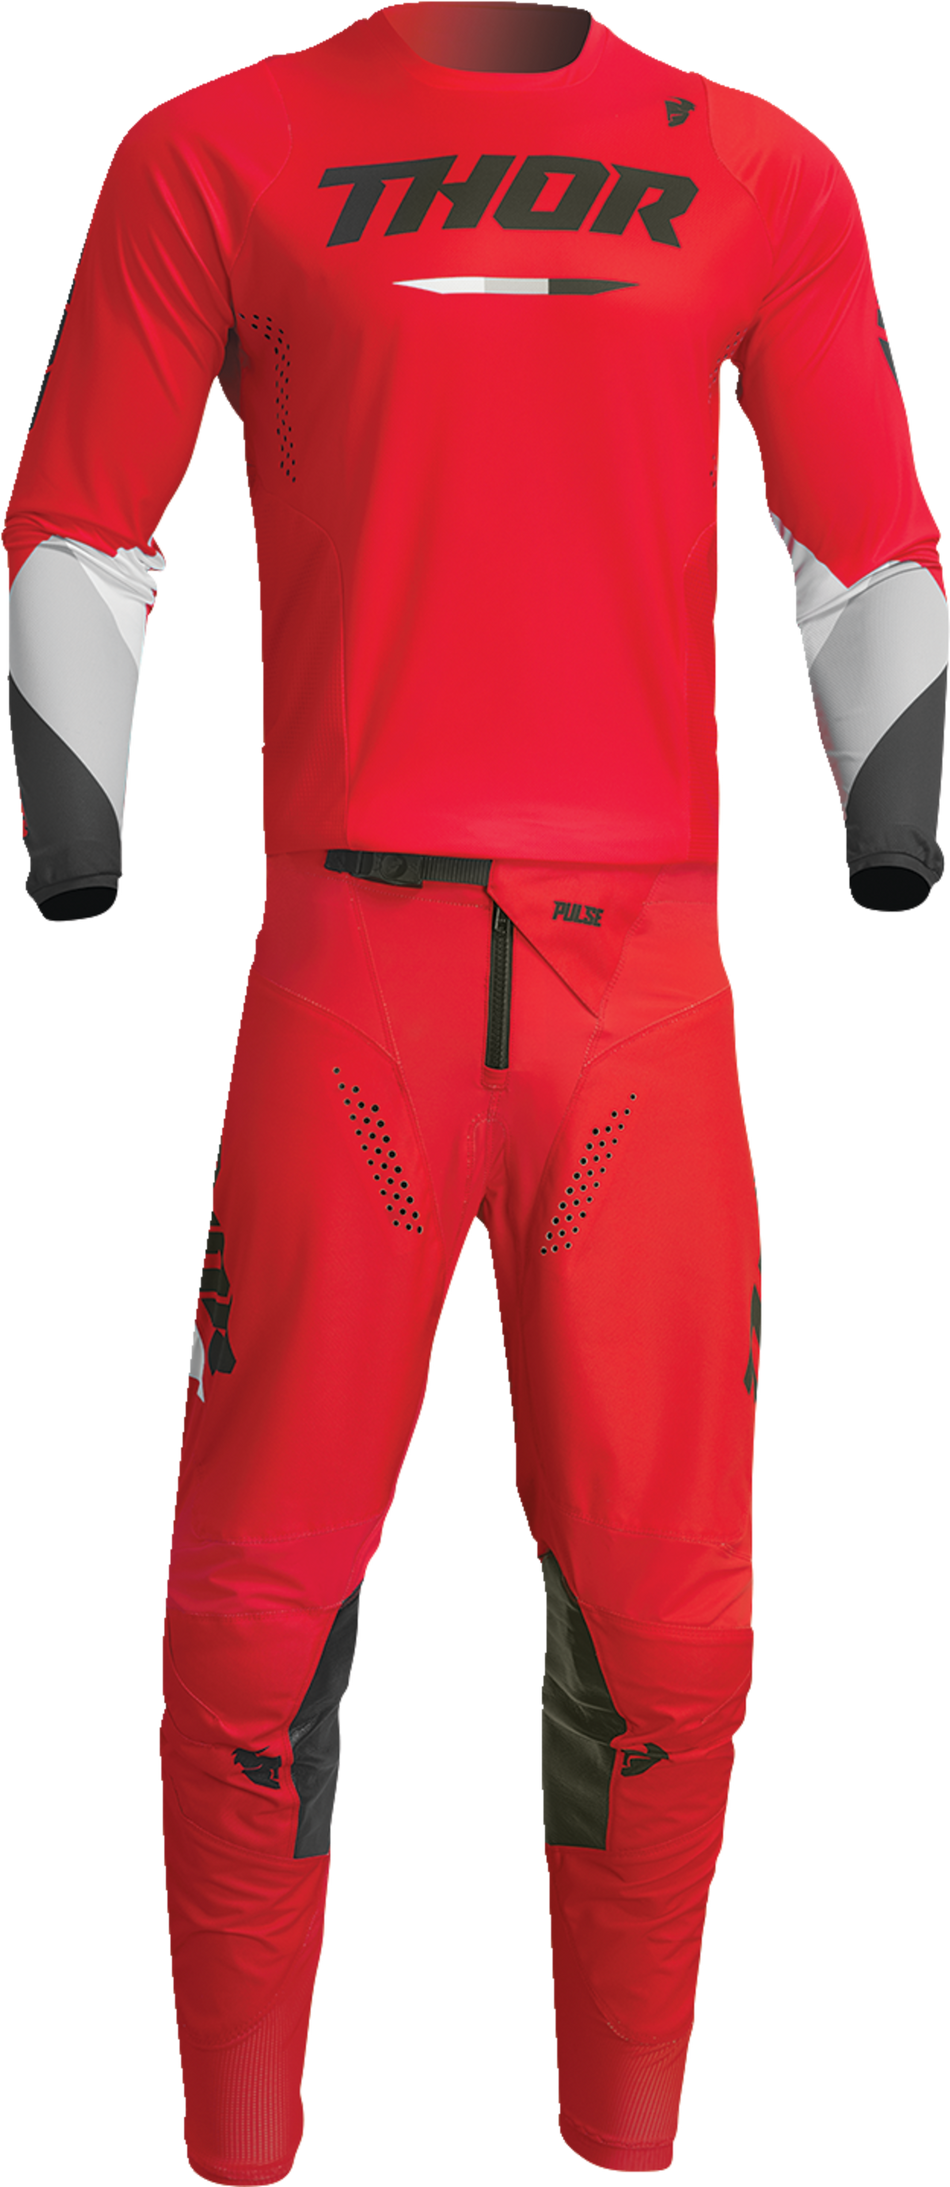 THOR Pulse Tactic Jersey - Red - Medium 2910-7080